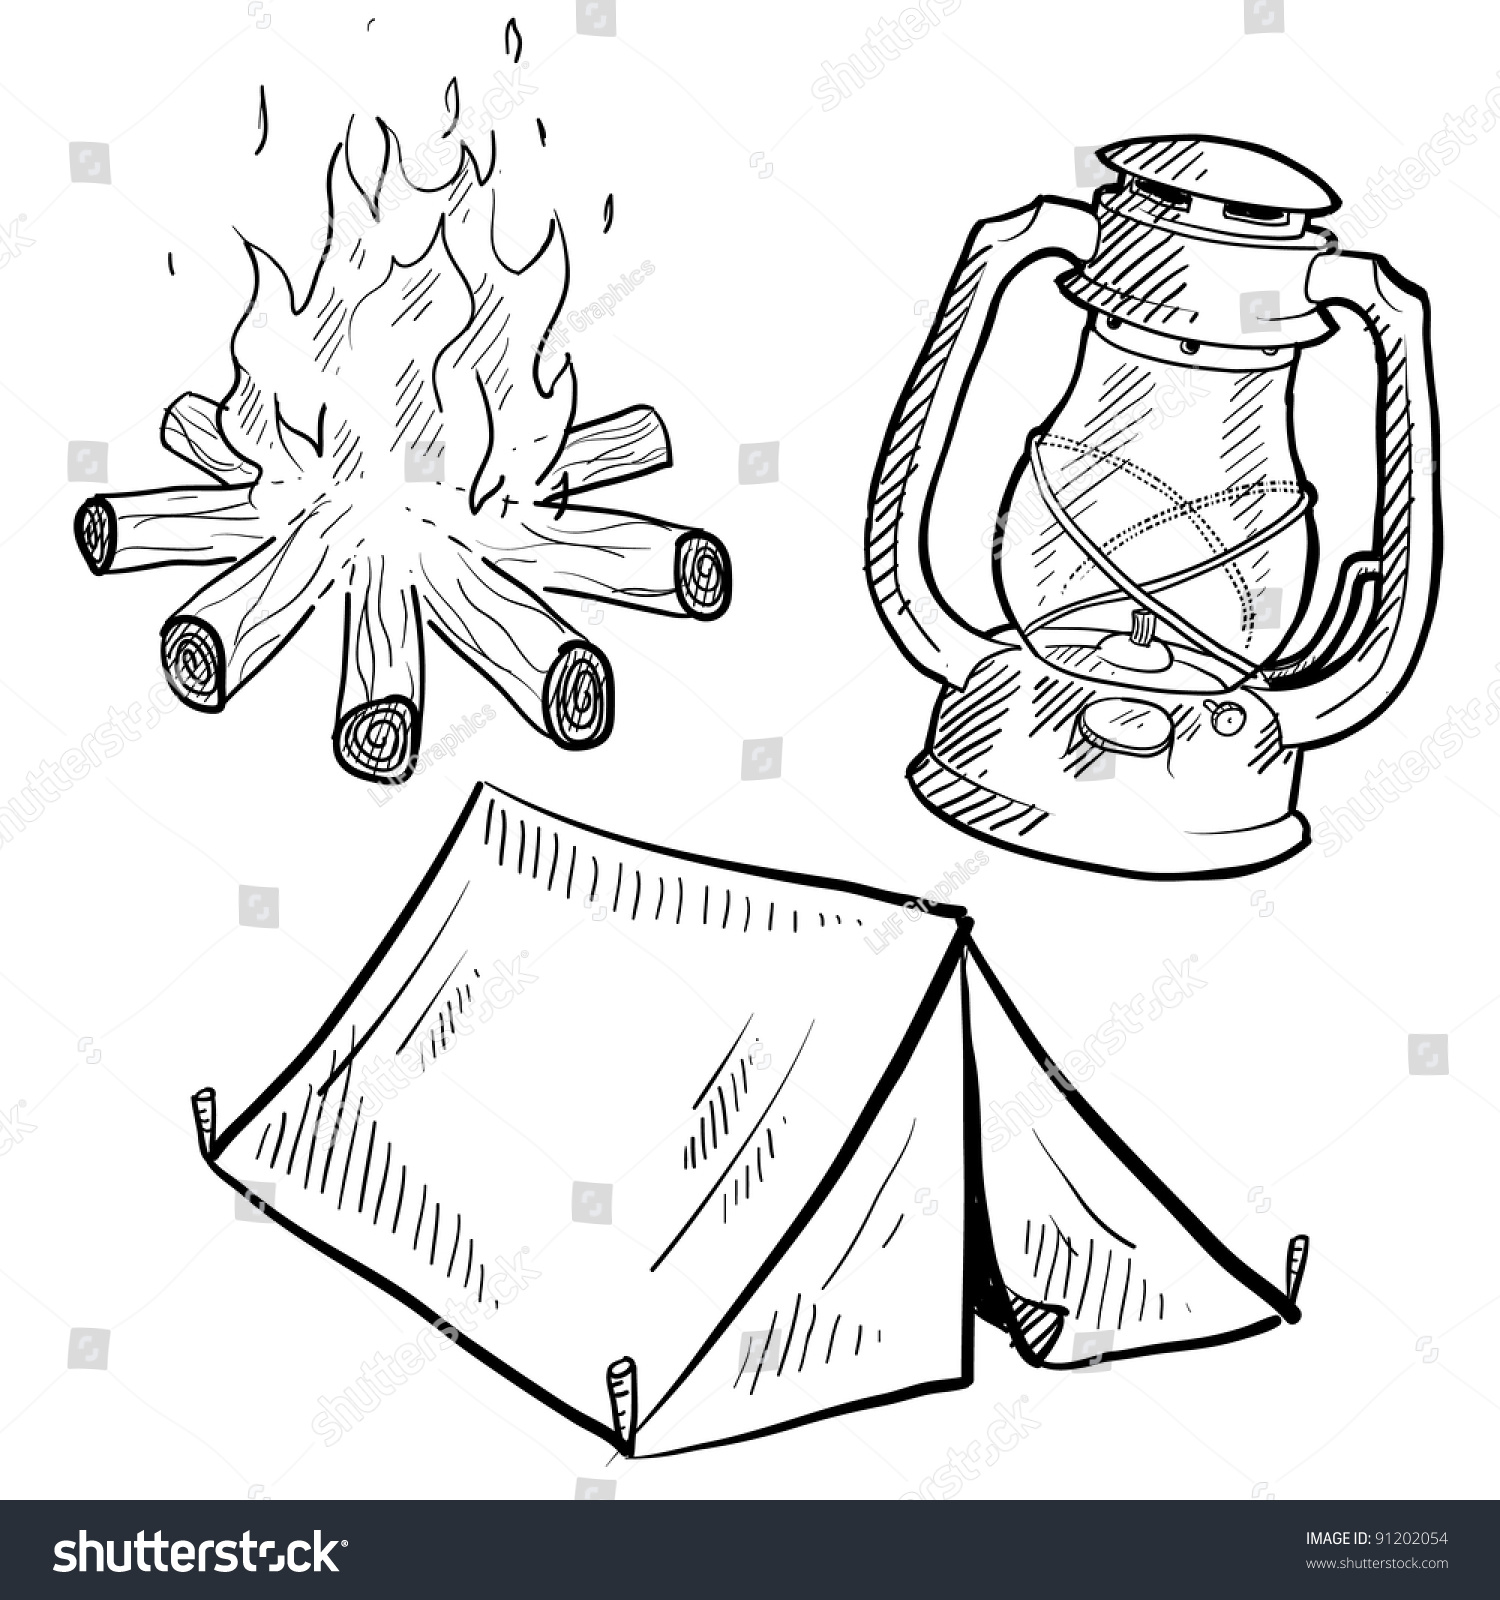 SVG of Doodle style camping equipment illustration in vector format suitable for web, print, or advertising use. Includes lantern, campfire, and tent. svg